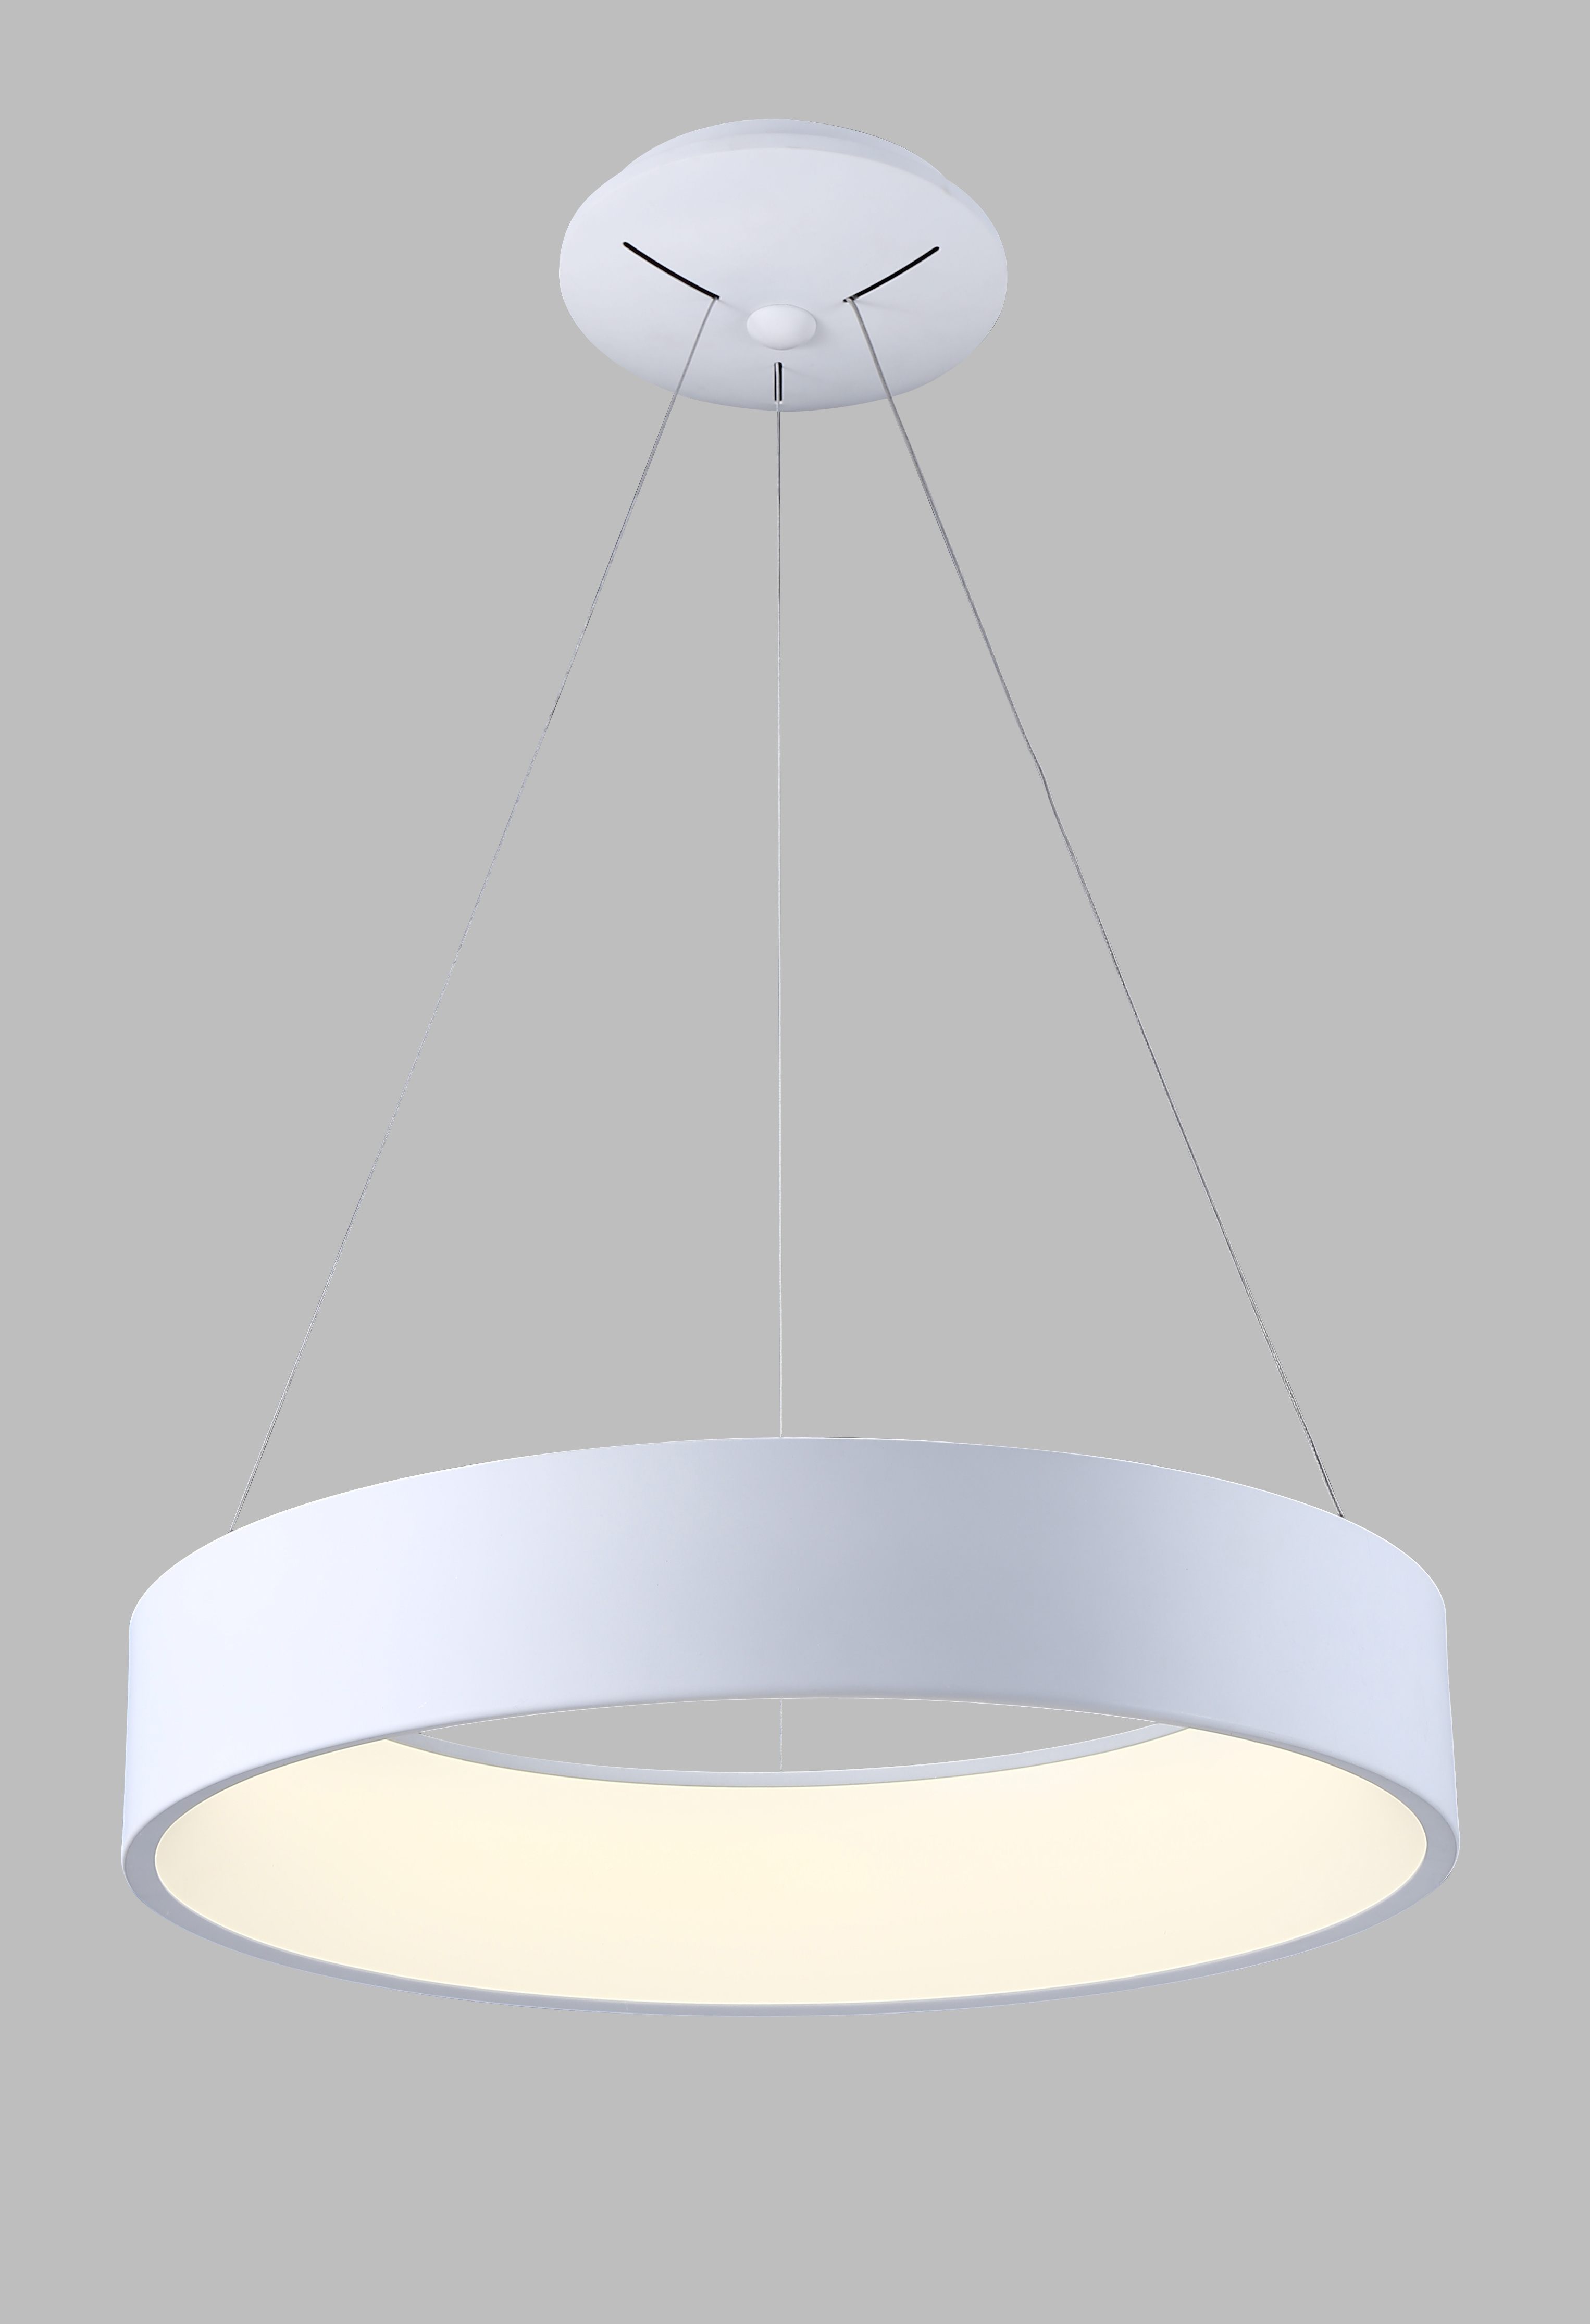 MD3380-S is bright and it is a simple and highly individual pendant